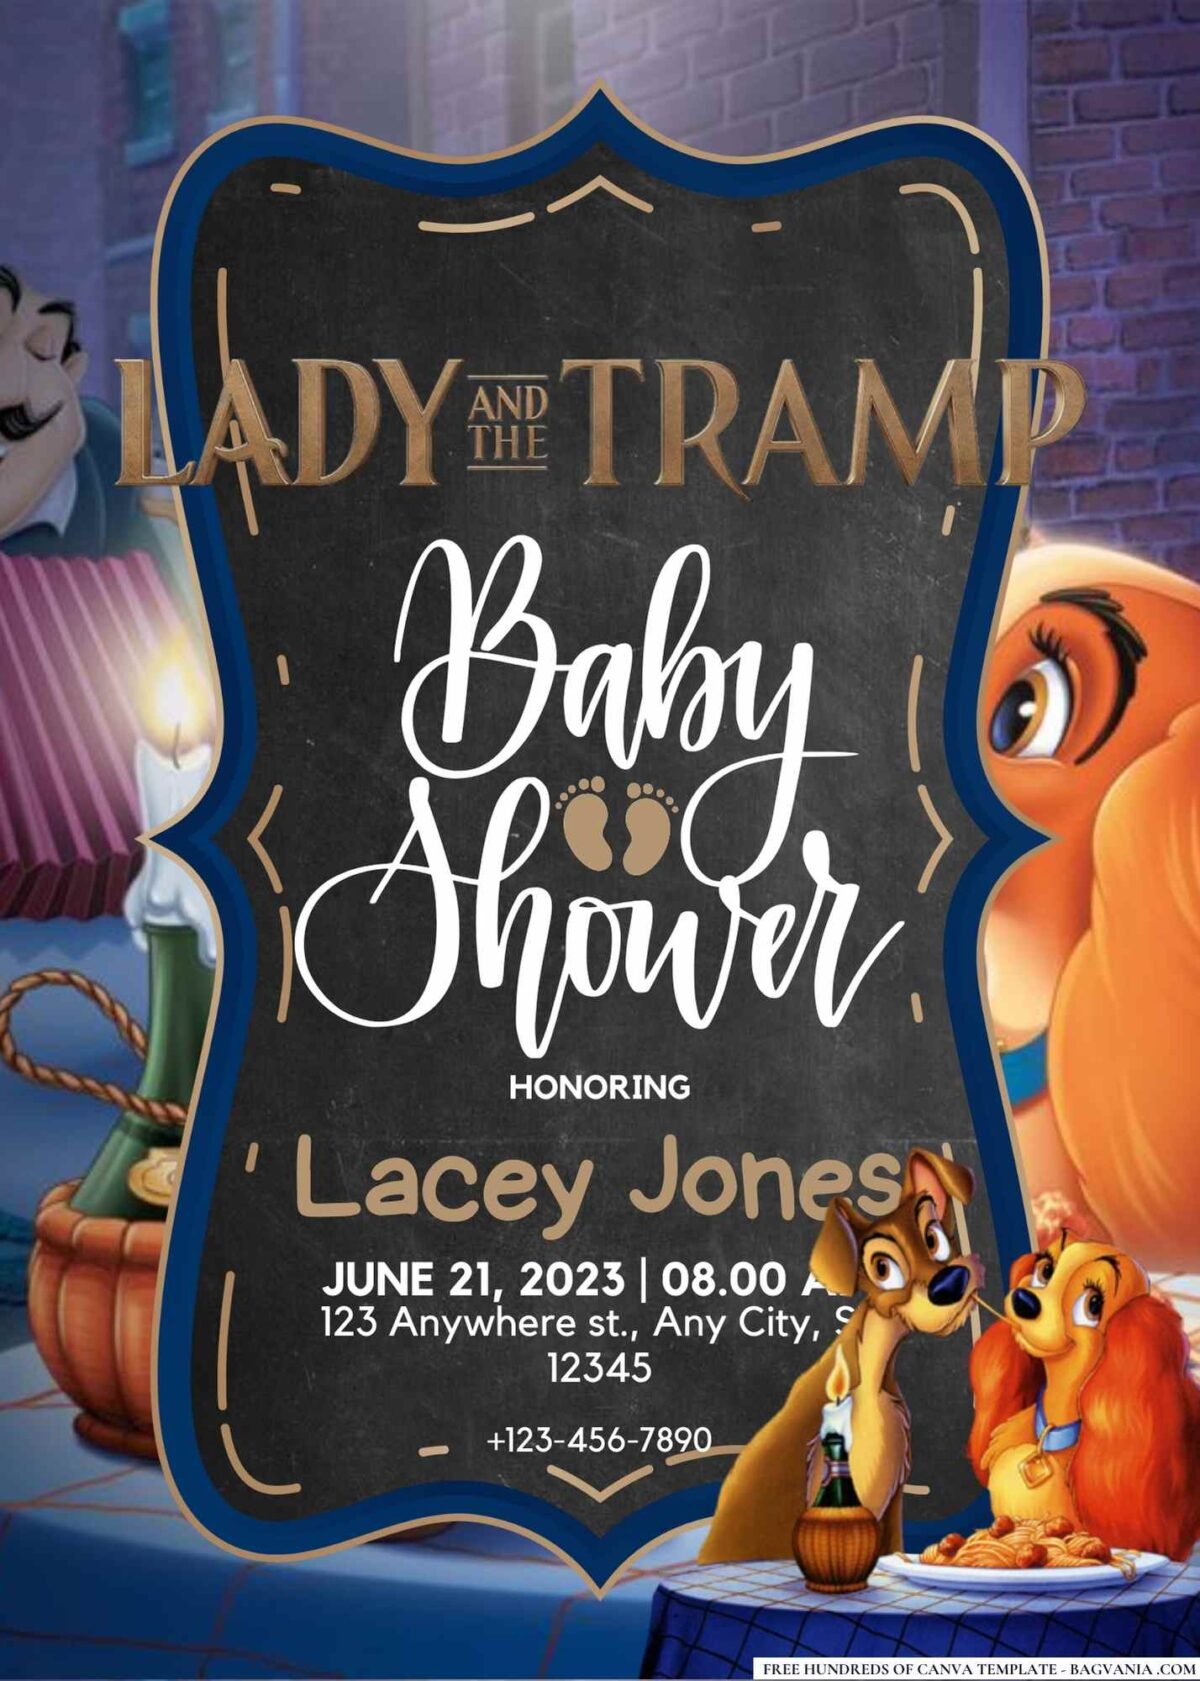 FREE Editable Lady and the Tramp Baby Shower Invitation